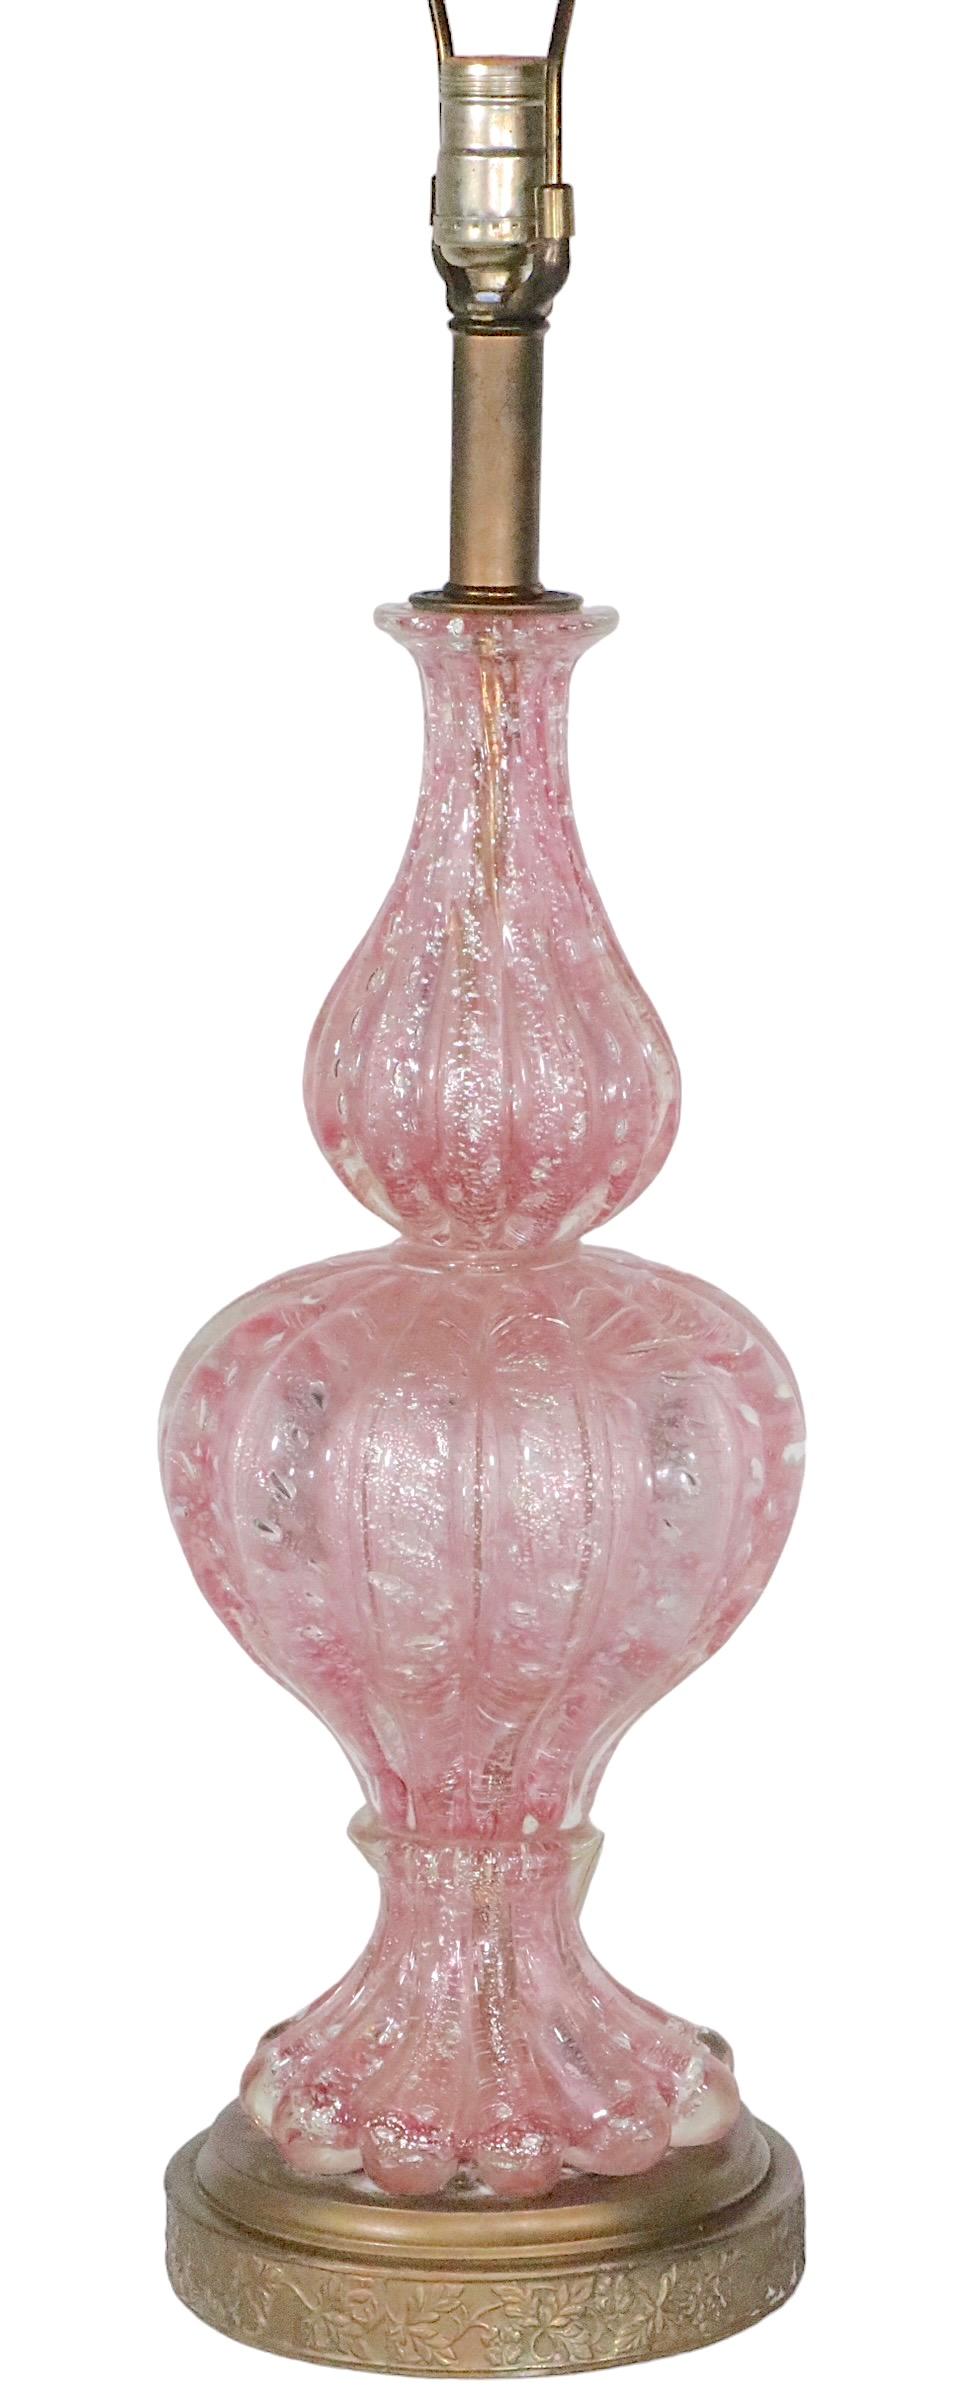 Pr. Murano Art Glass Table Lamps Made in Italy  att.  to  Barovier c. 1950’s  For Sale 8